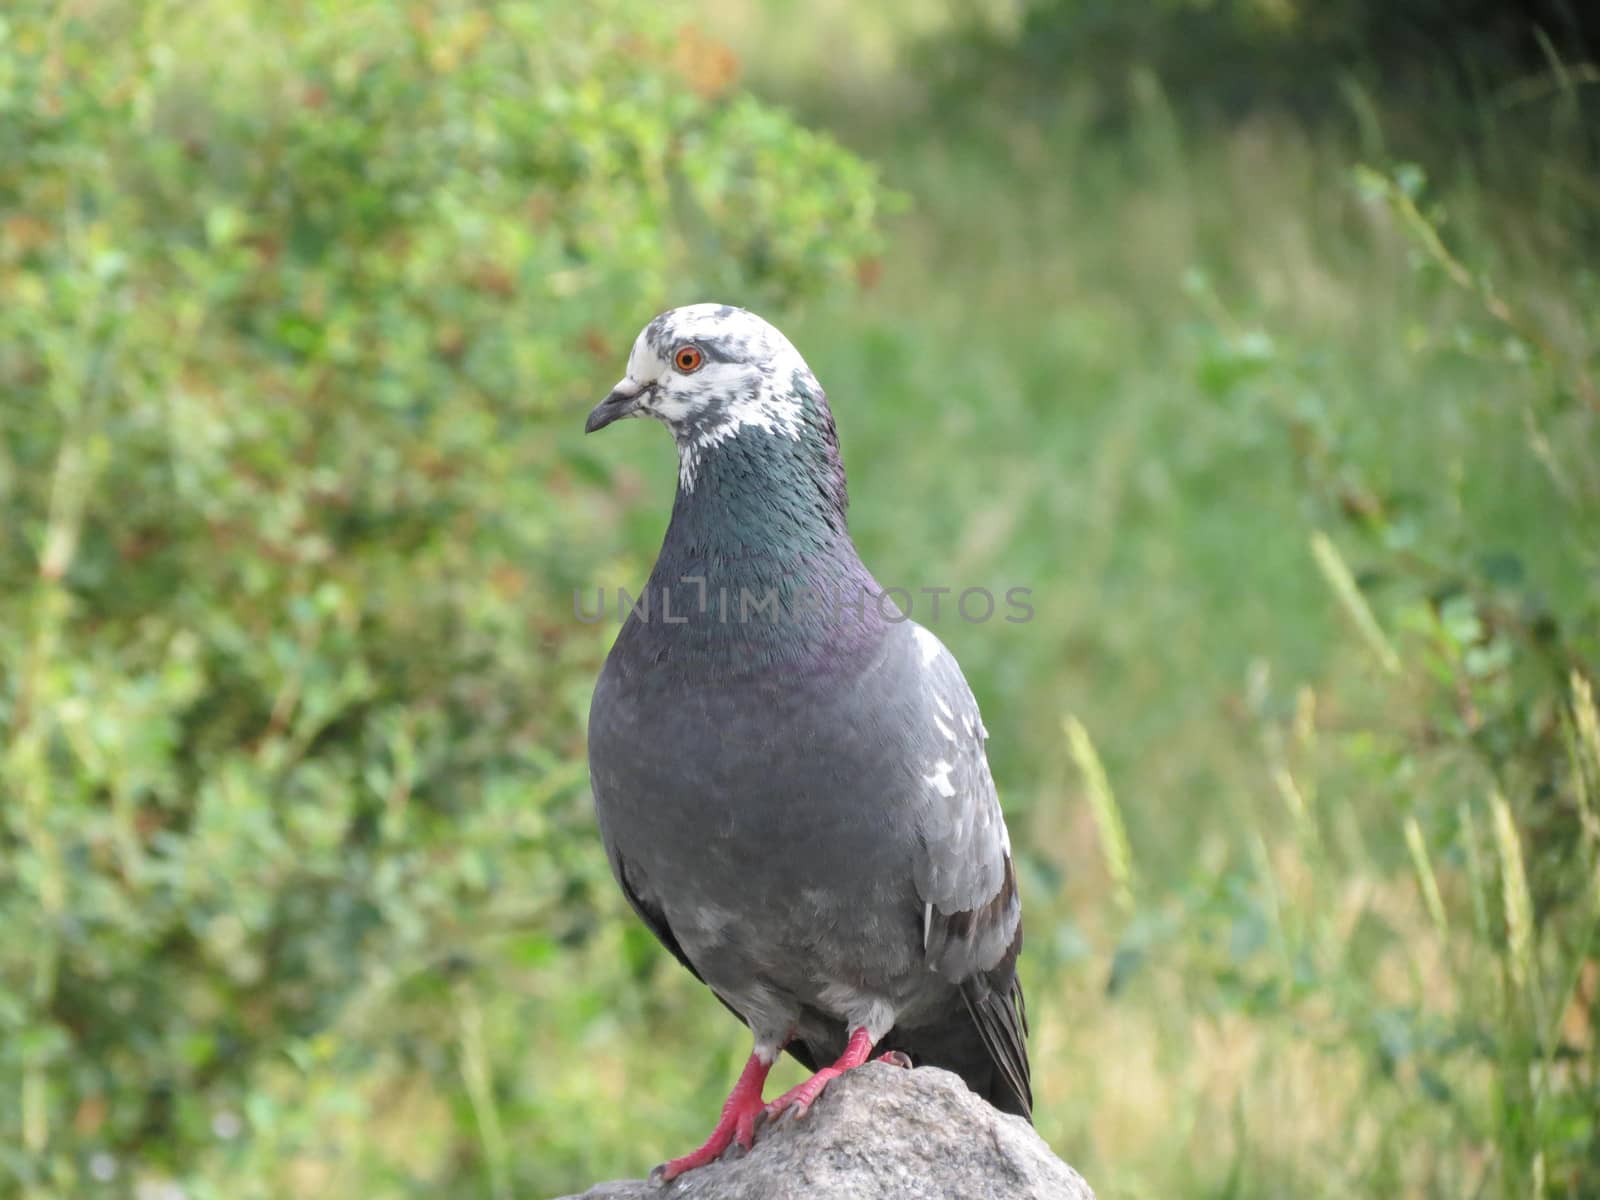  Urban pigeon sitting and posing in the park on a stone                              